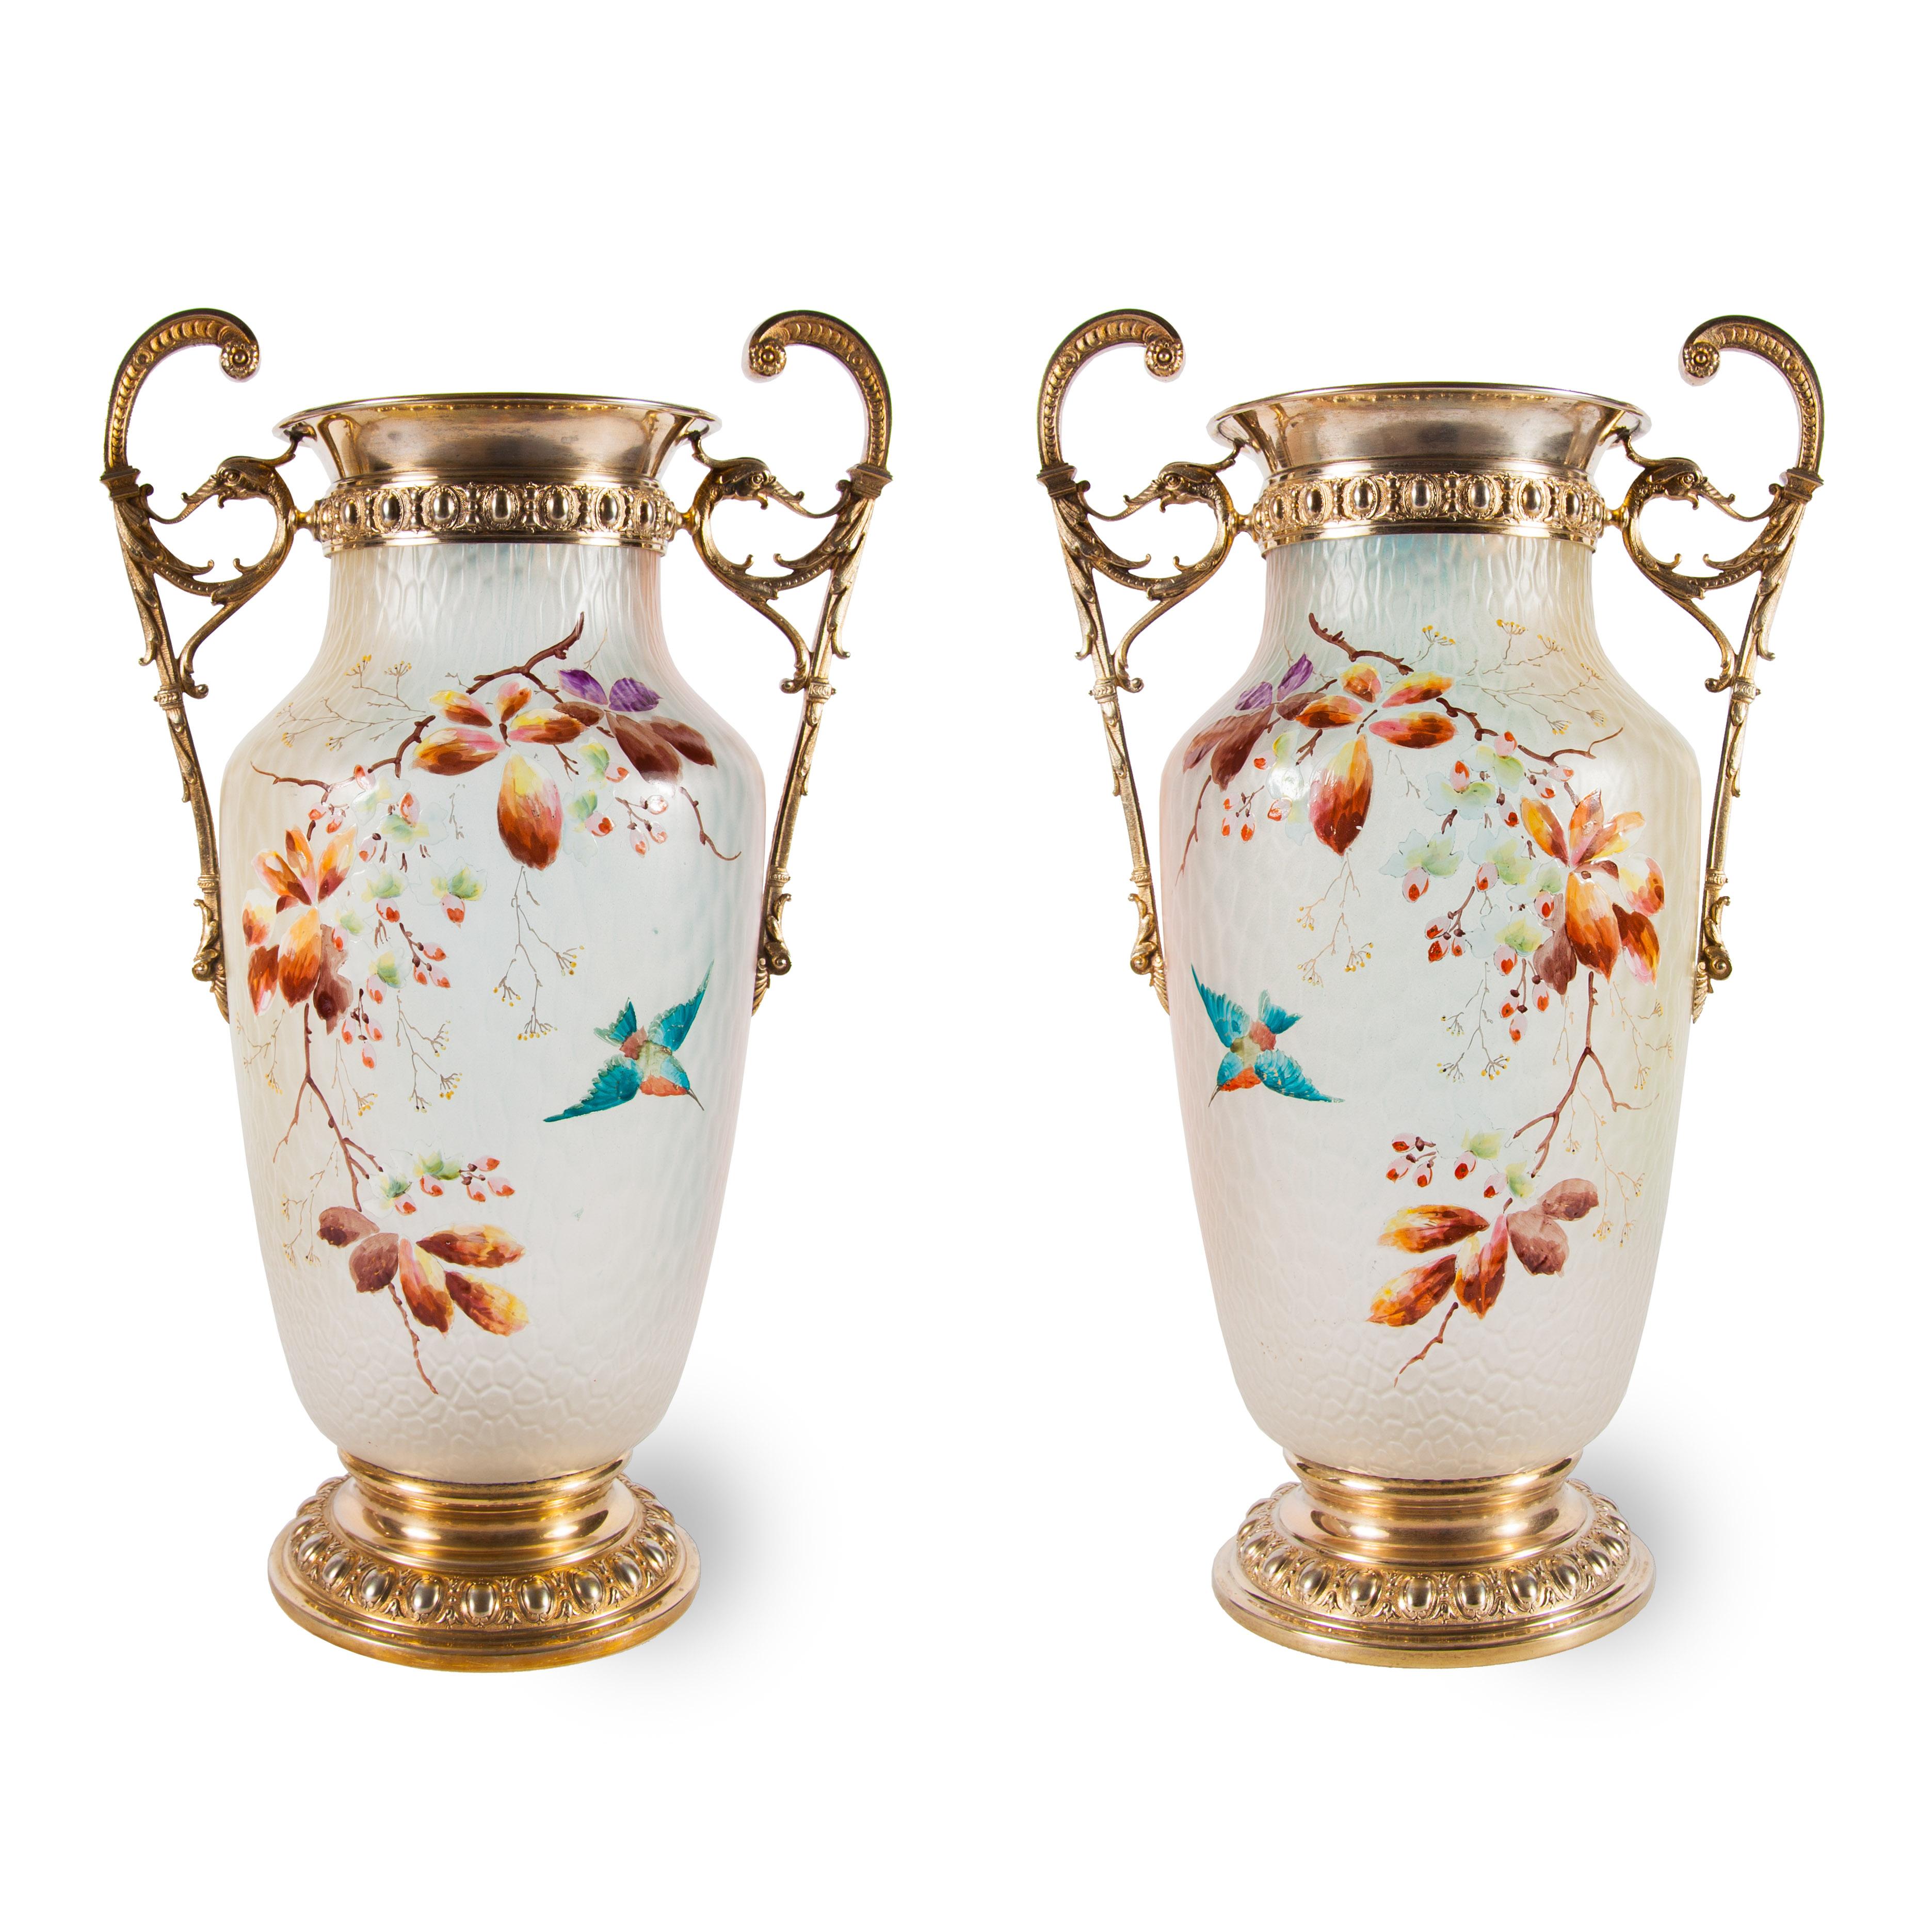 These modern looking vases have a fantastic fin-de-siecle splendour, mainly owing to the fine combination of frosted glass and enamelled decorations which adorn their bodies. Each vase is mounted with gilt brass, on its circular base, its rim and